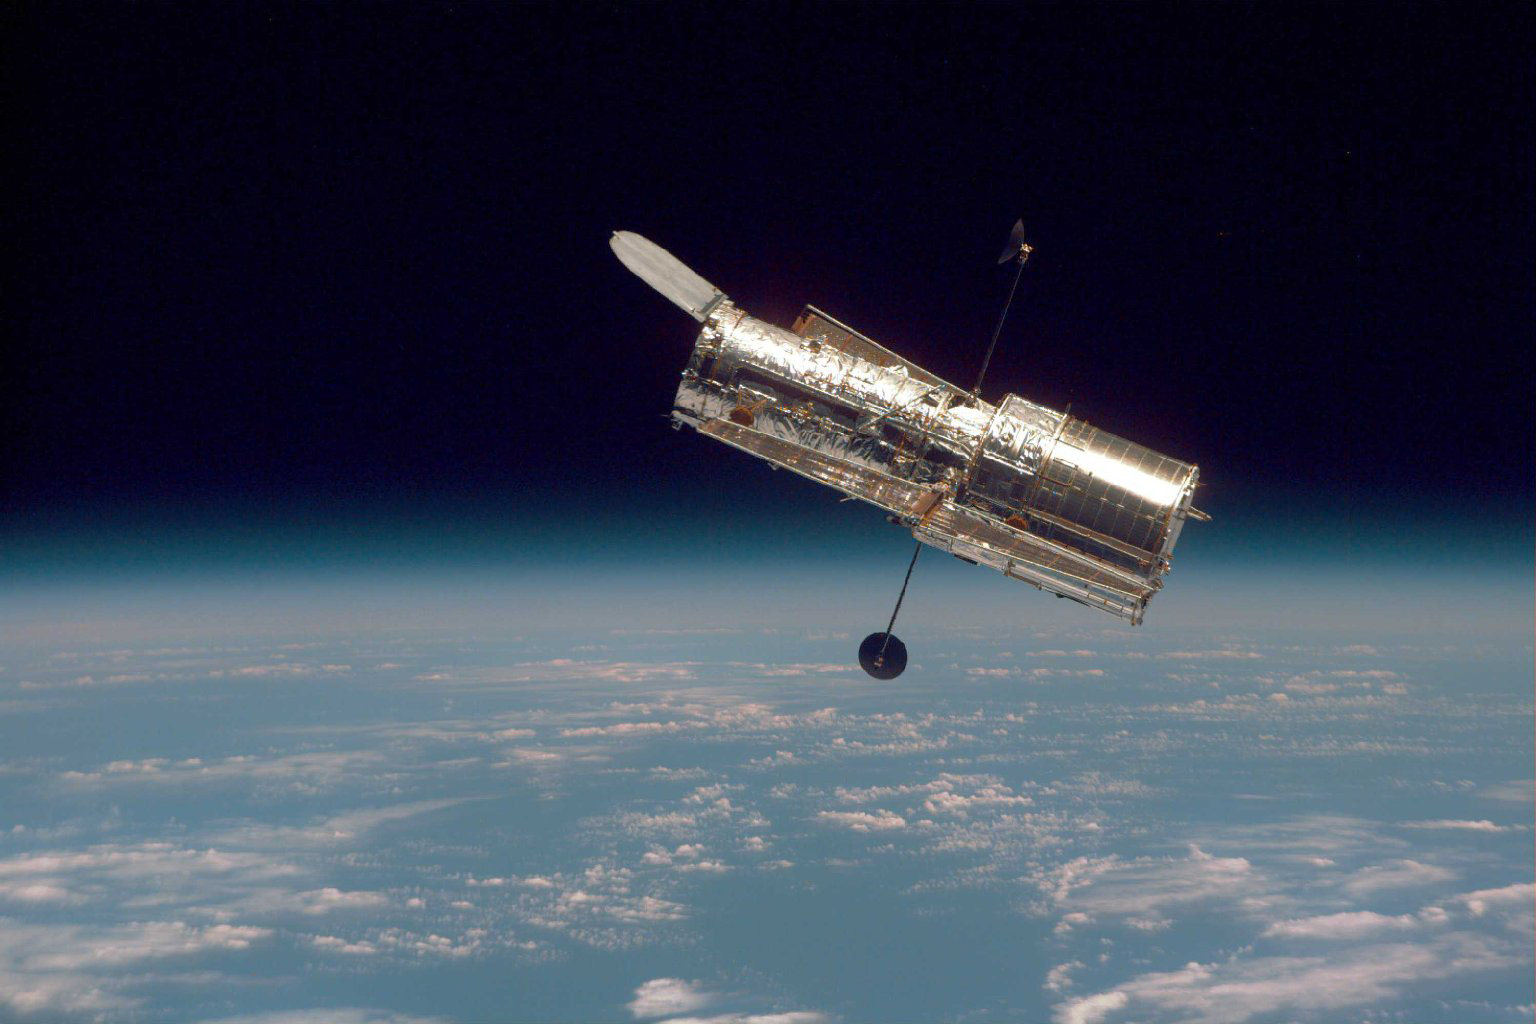 Hubble satellite in outer space, showing its shiny exterior against the backdrop of Earth's atmosphere below and dark space above. 